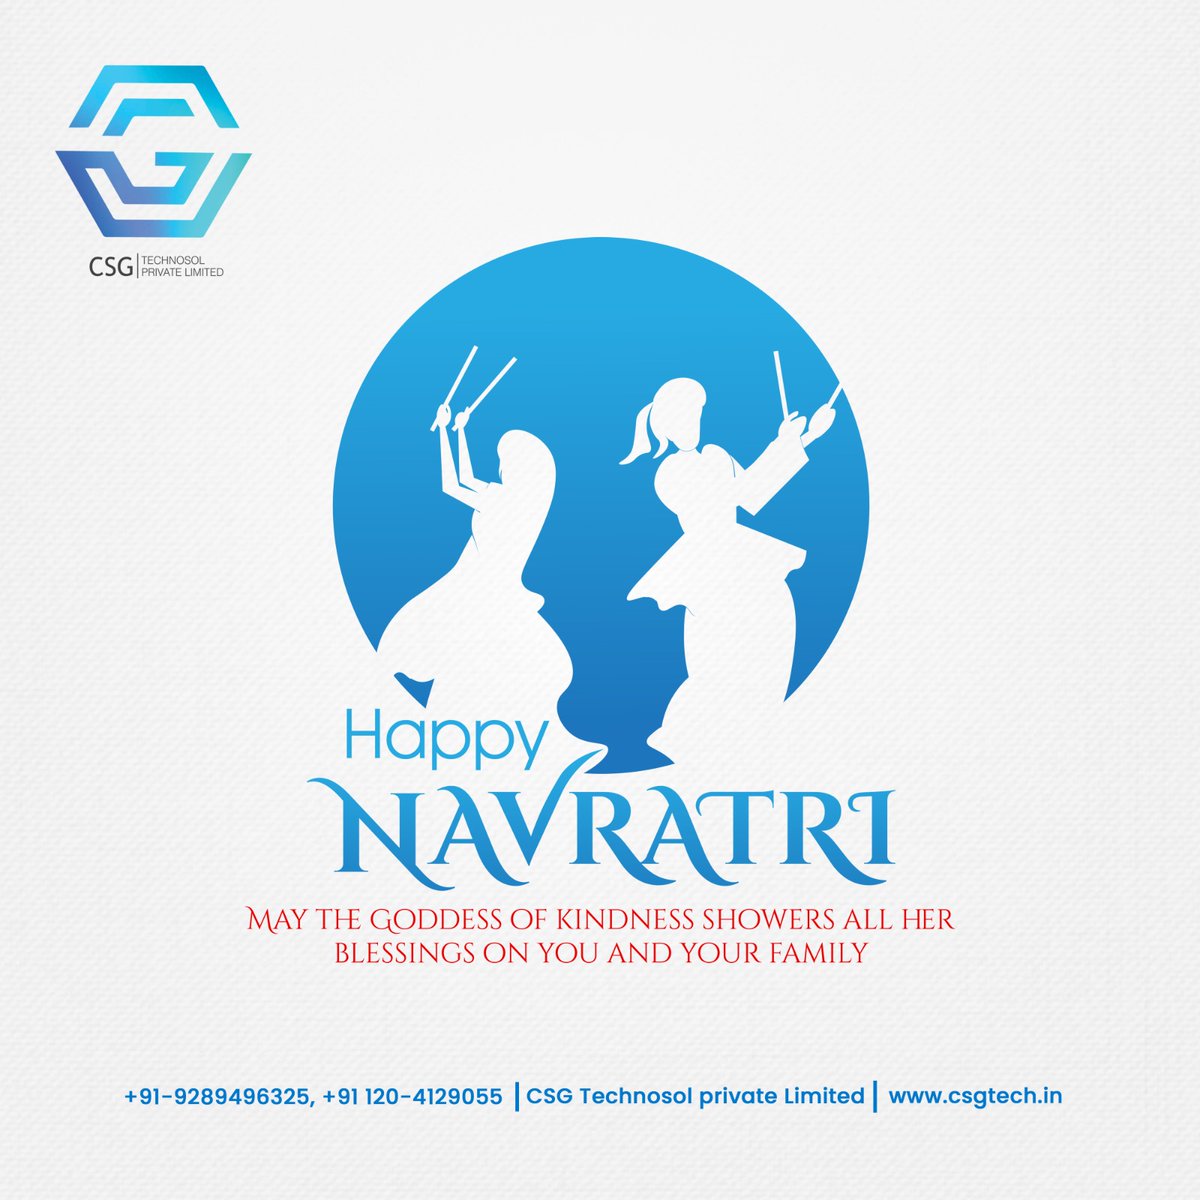 May the 9 #auspicious days of #Navratri  bring you and your loved once #joy, #prosperity and the #blessings of #Maa #Durga.

#csgTech #SoftwareDevelopmentCompany #crmDeveloper #erpDeveloper #ecommerceDeveloper #paymentGatewayDeveloper #digitalMarketingAgency